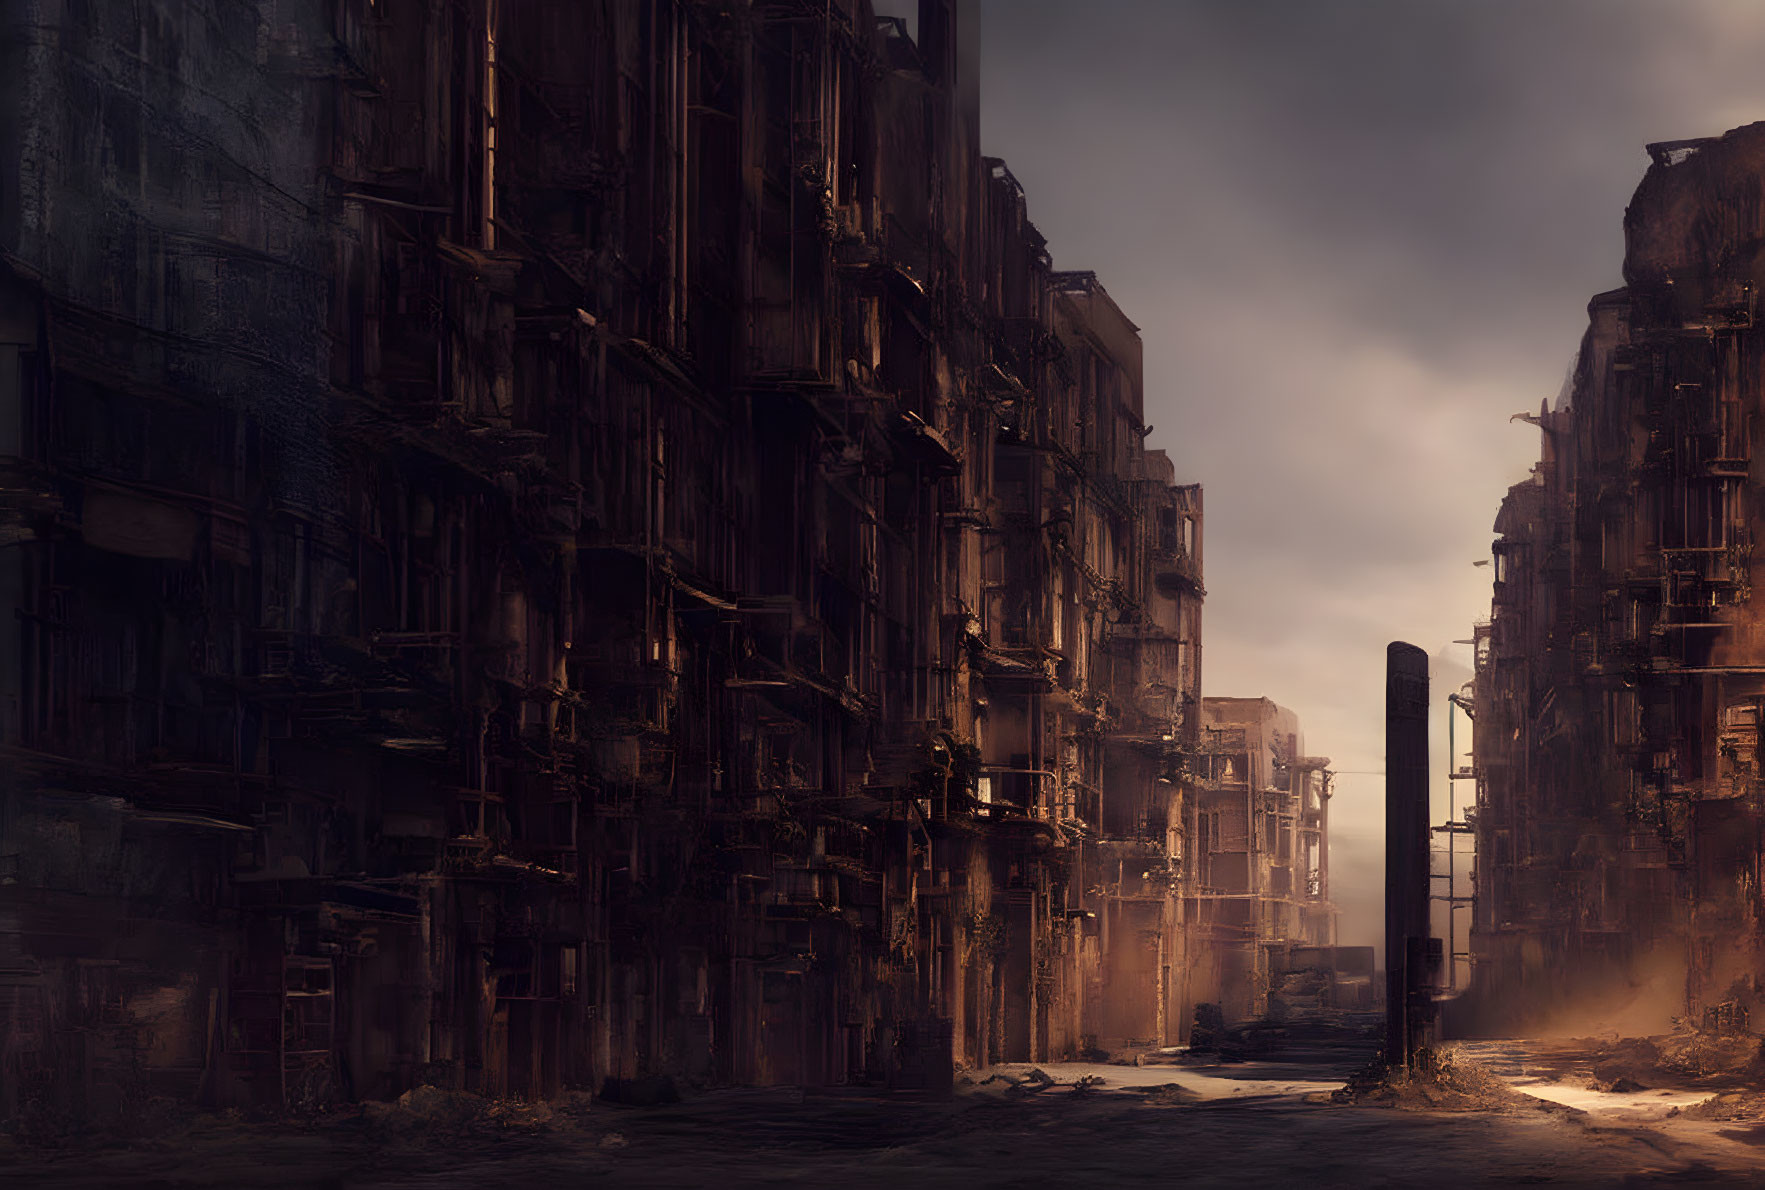 Desolate post-apocalyptic cityscape with dilapidated buildings.